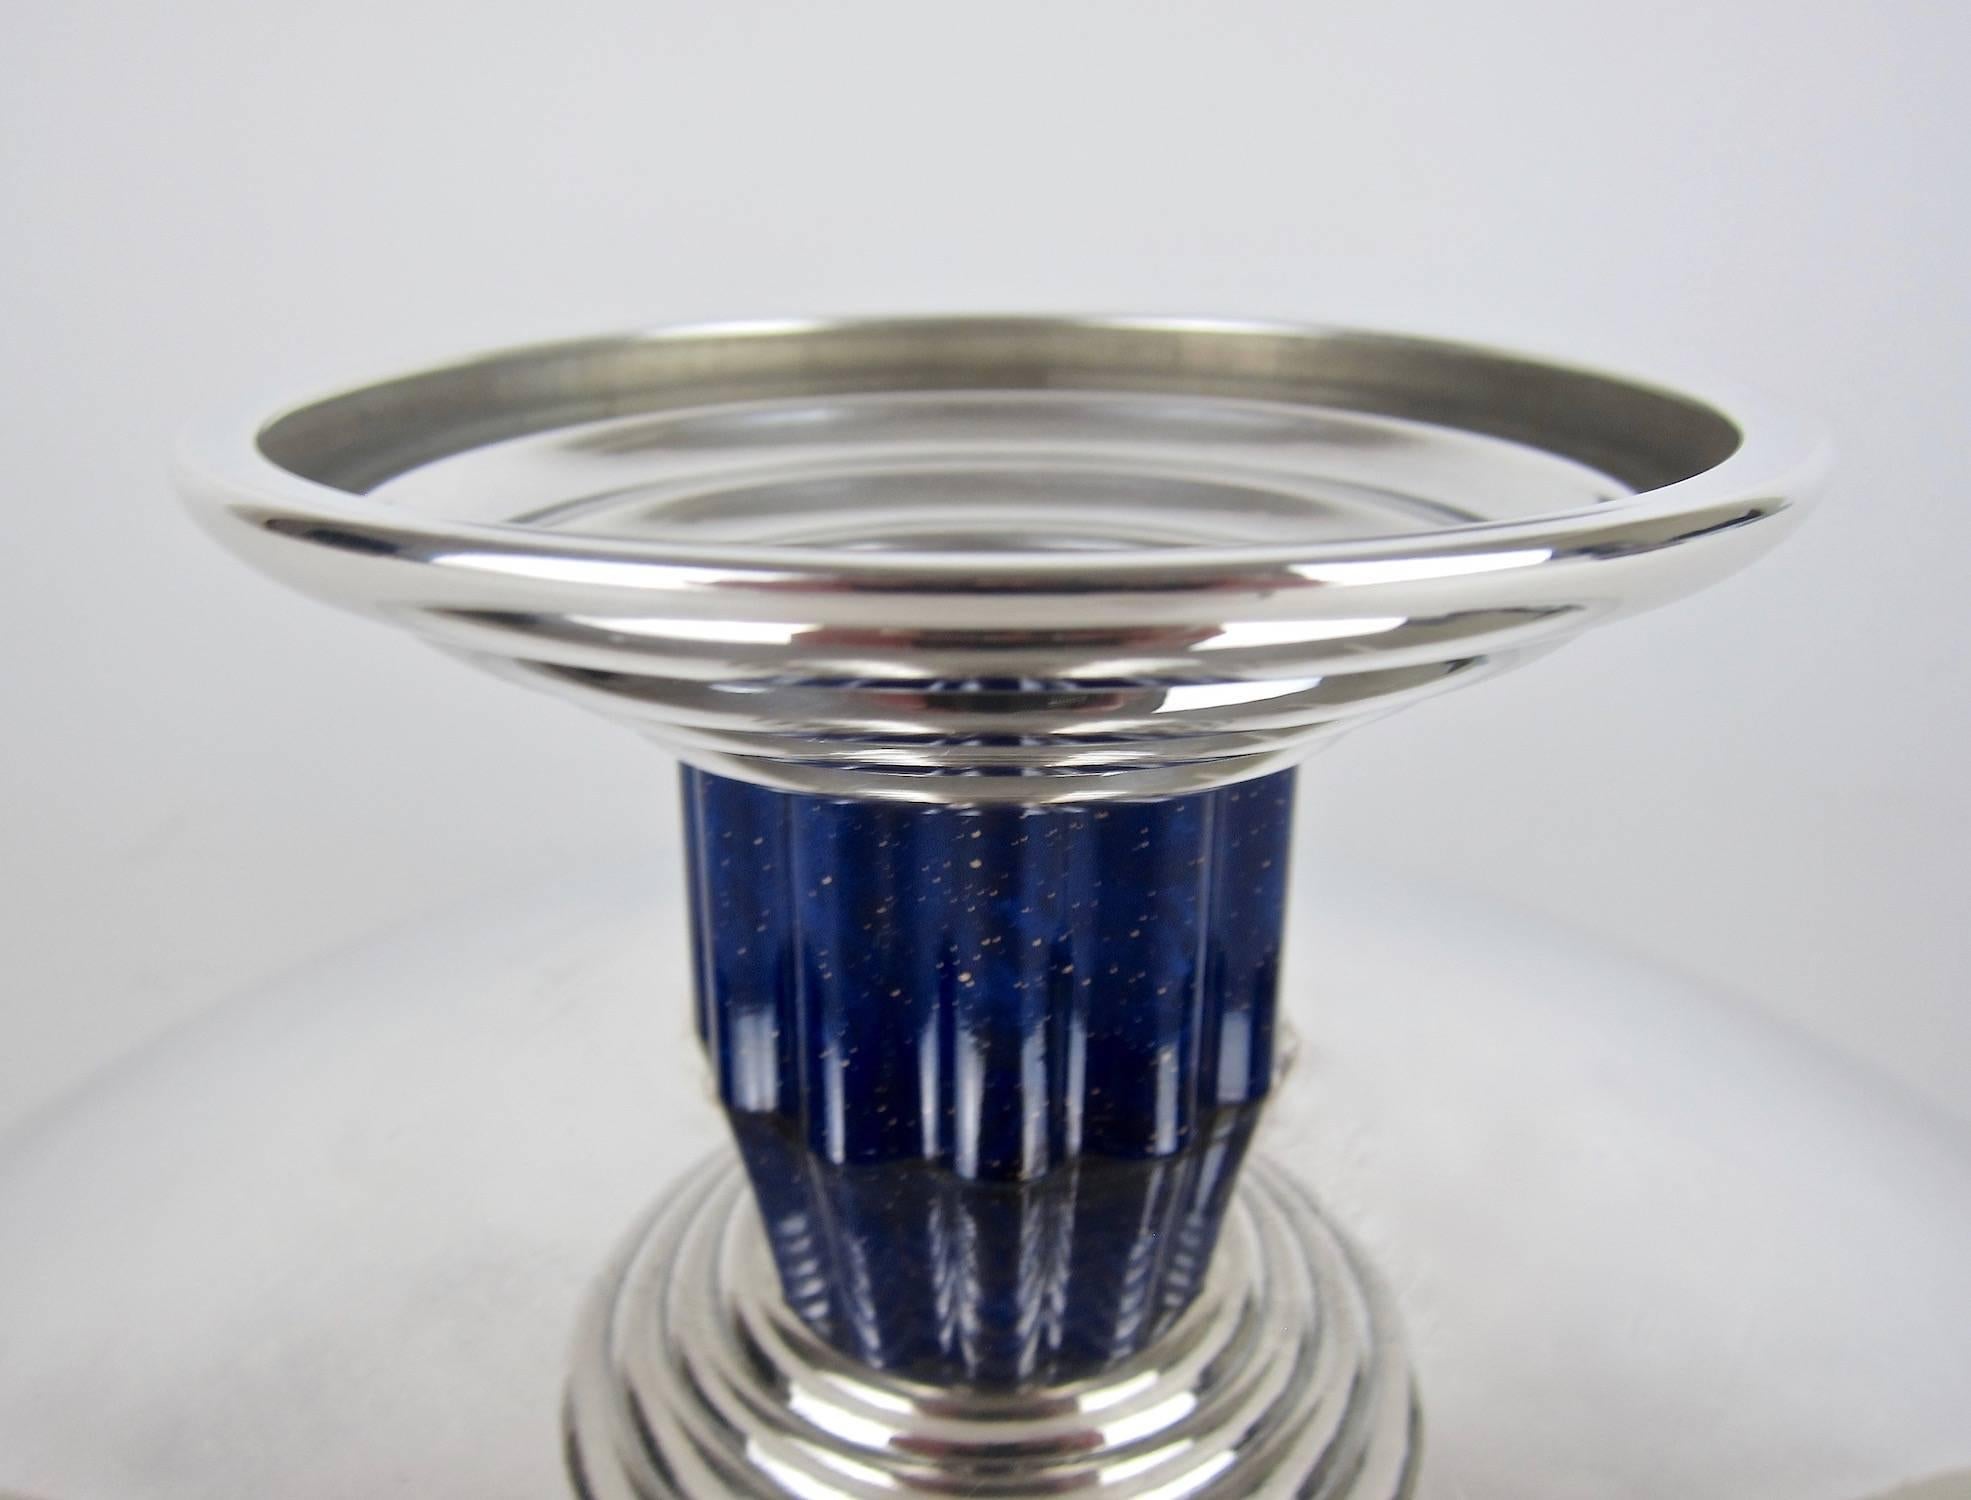 Large French Puiforcat Art Deco Tazza in Silverplate with Faux Lapis Lazuli Stem 1